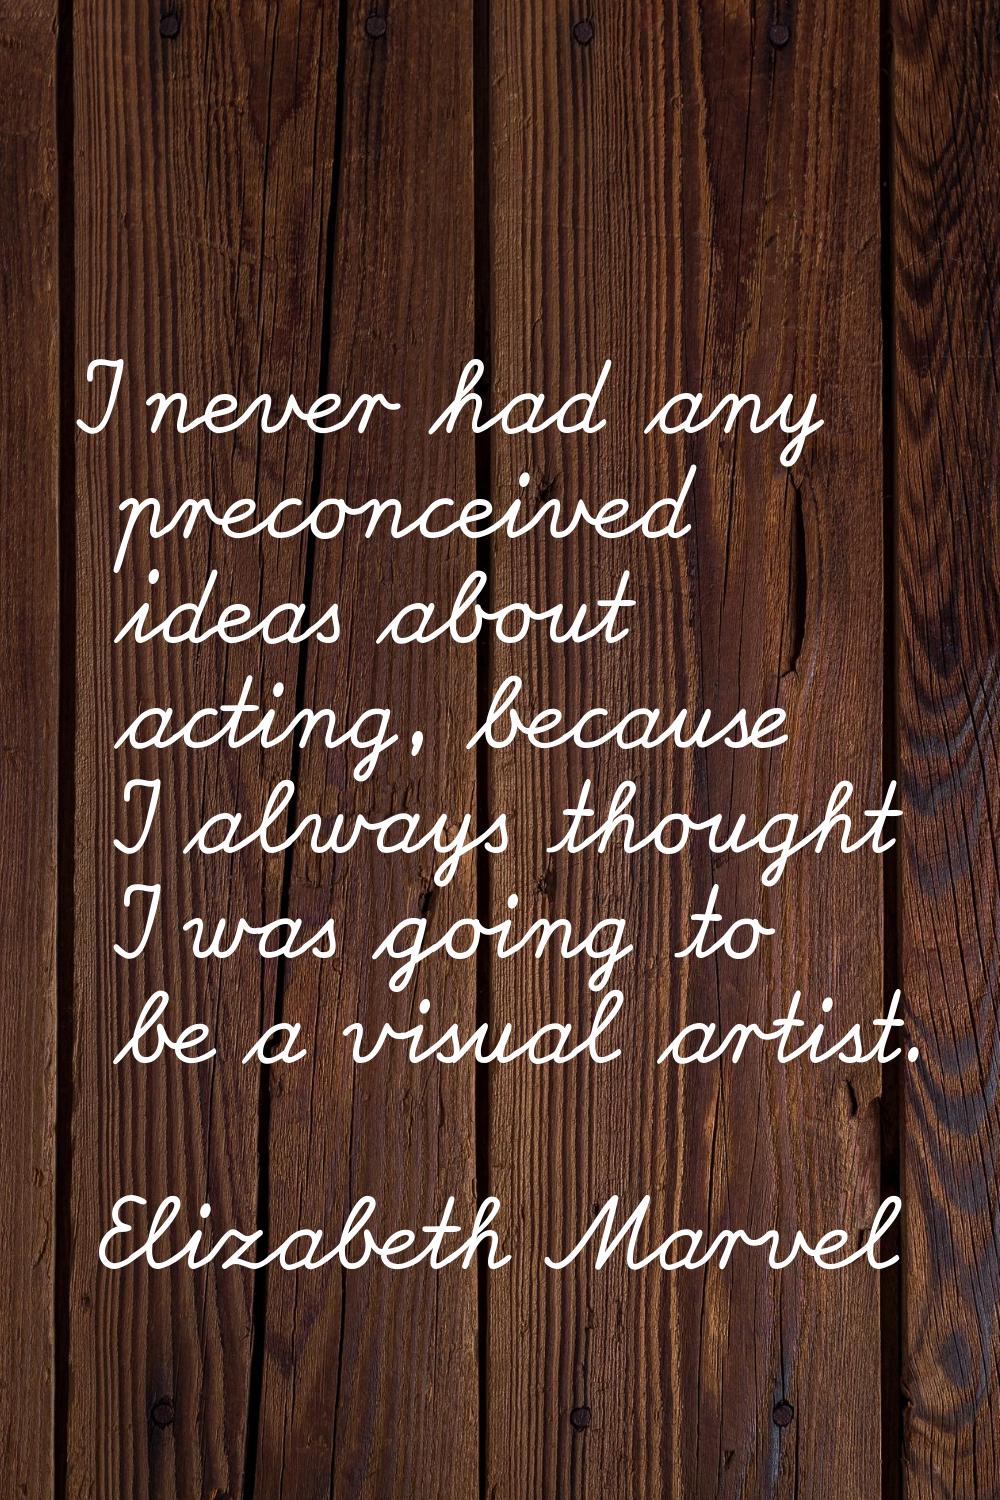 I never had any preconceived ideas about acting, because I always thought I was going to be a visua